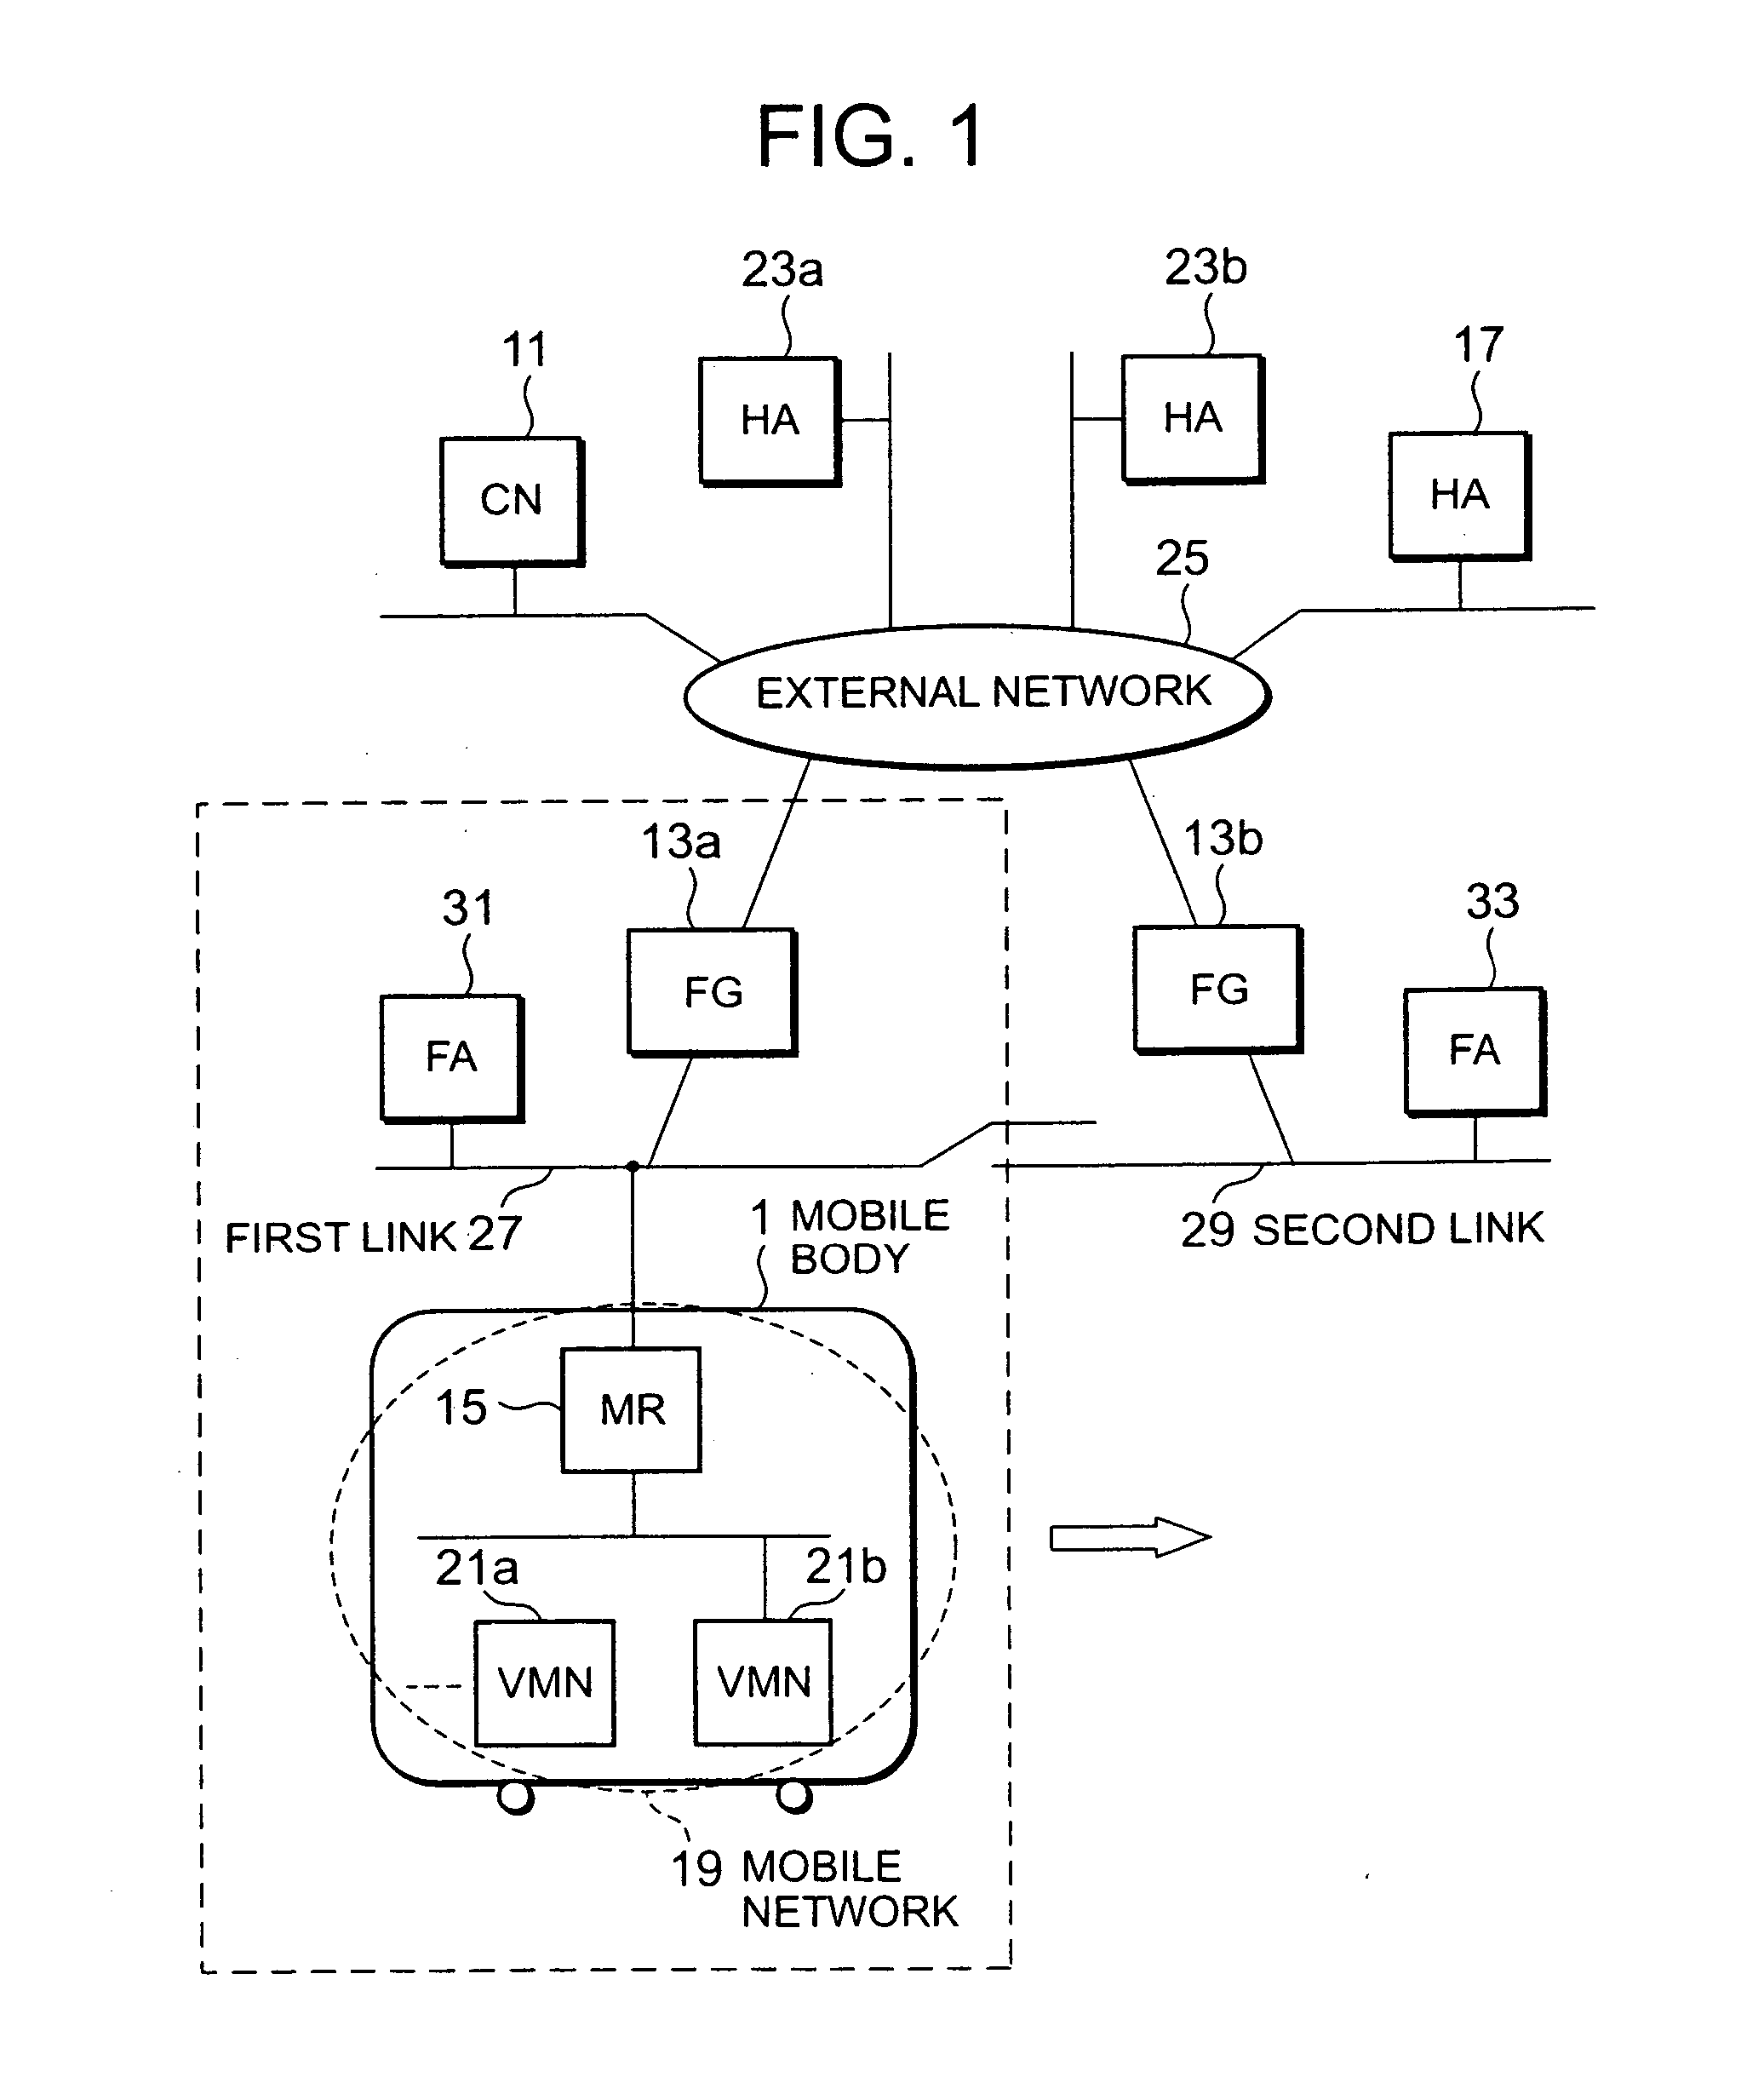 Subnet connection switching communication system